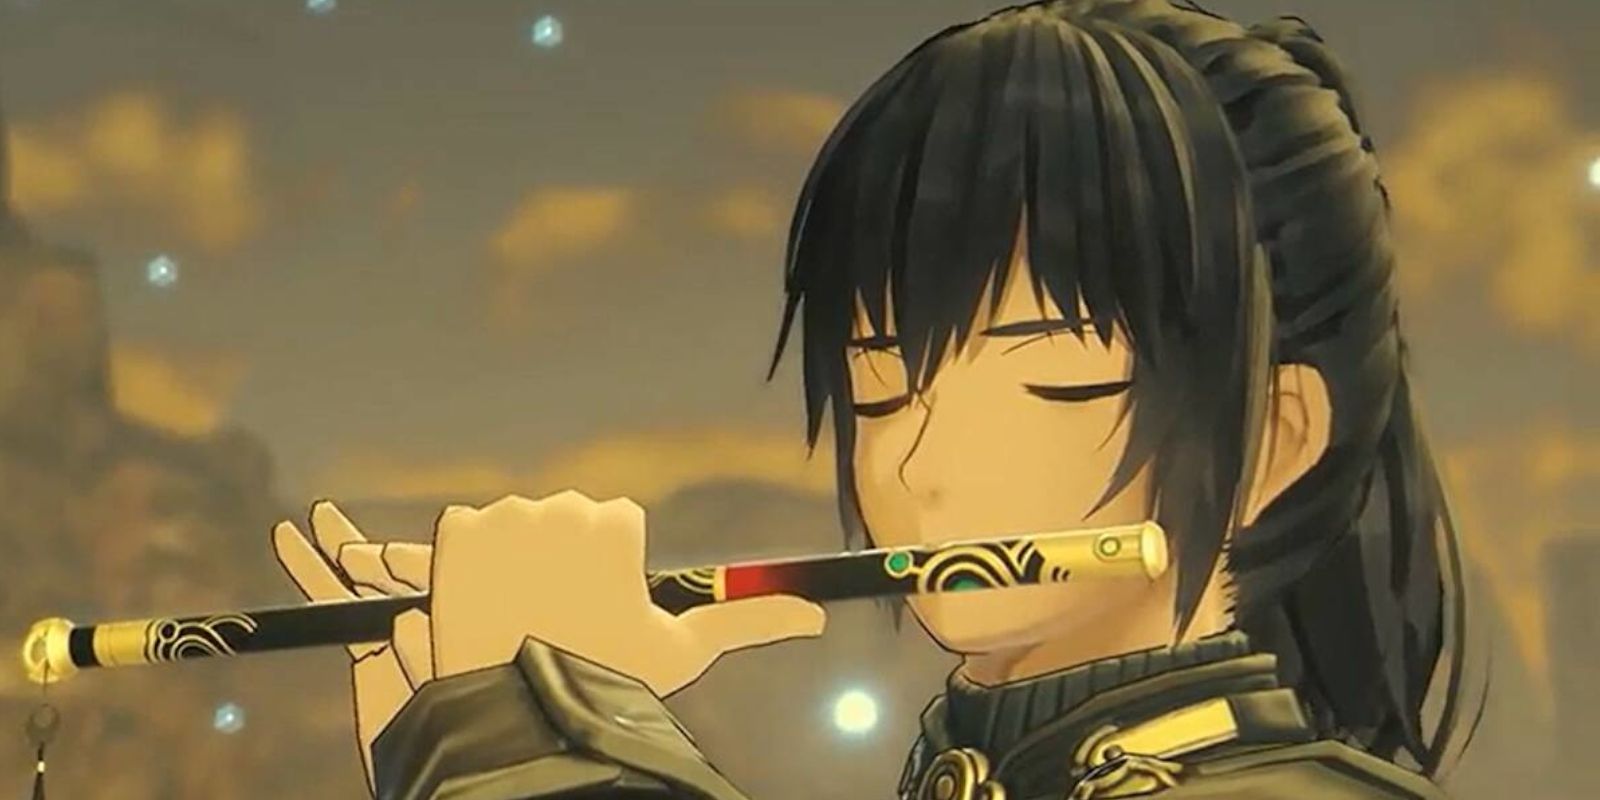 Noah performs a song with a flute in Xenoblade Chronicles 3